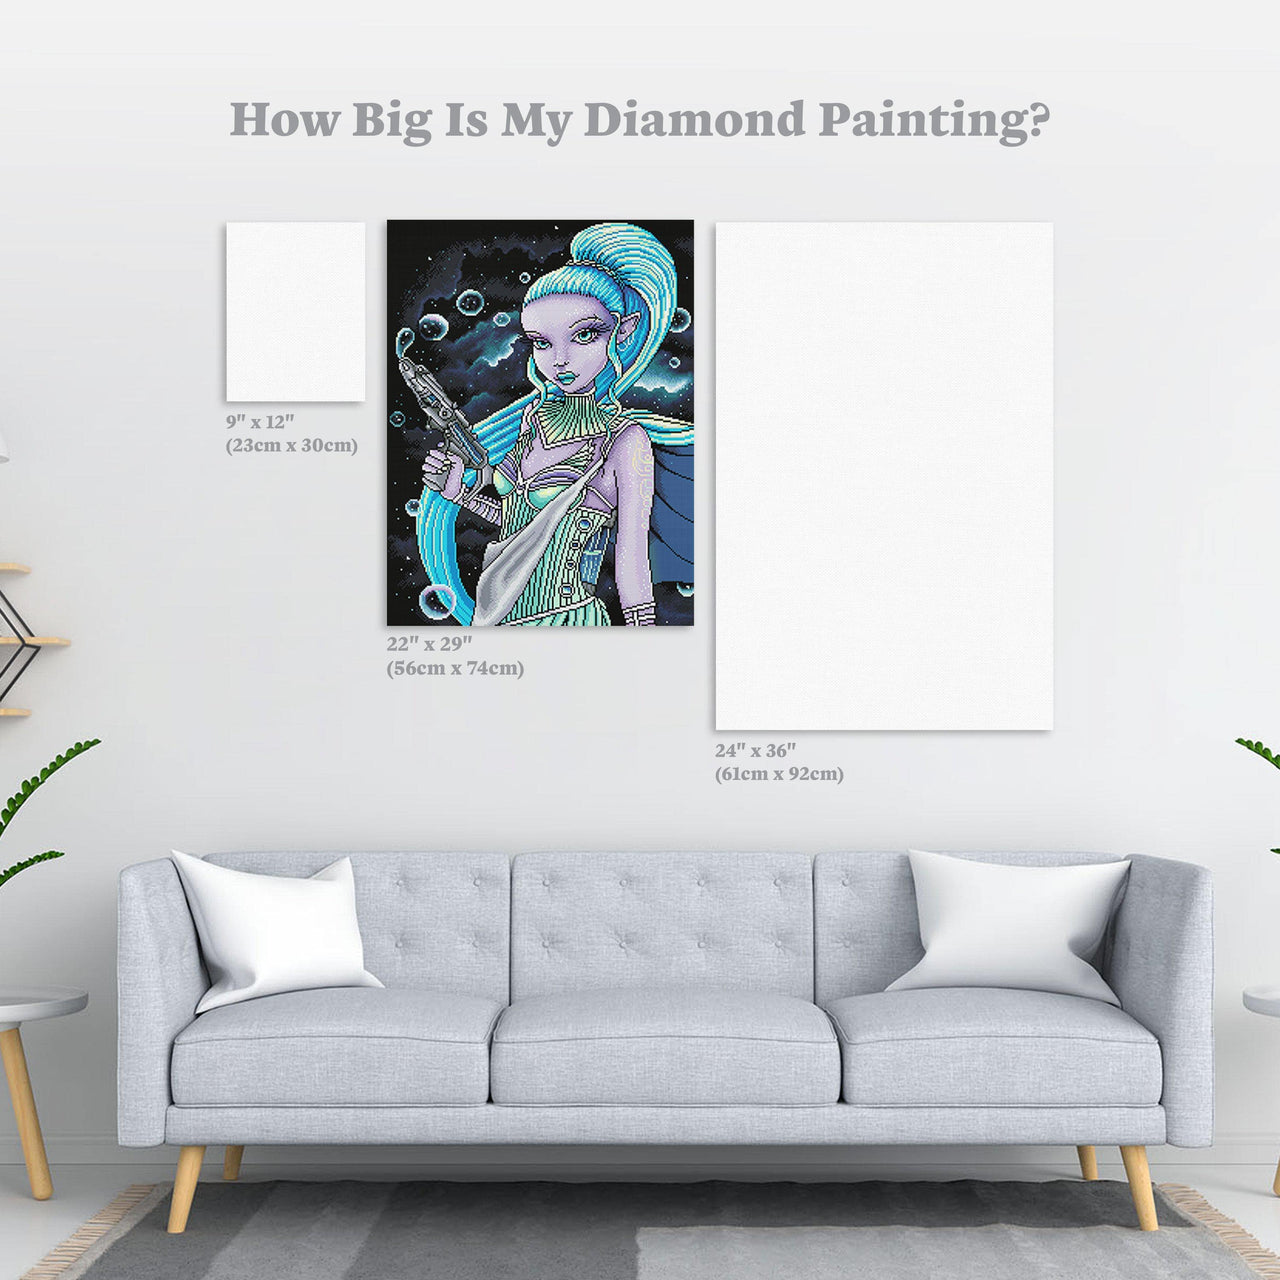 Diamond Painting Astrid 22" x 29″ (56cm x 74cm) / Round with 34 Colors including 4 ABs / 52,337